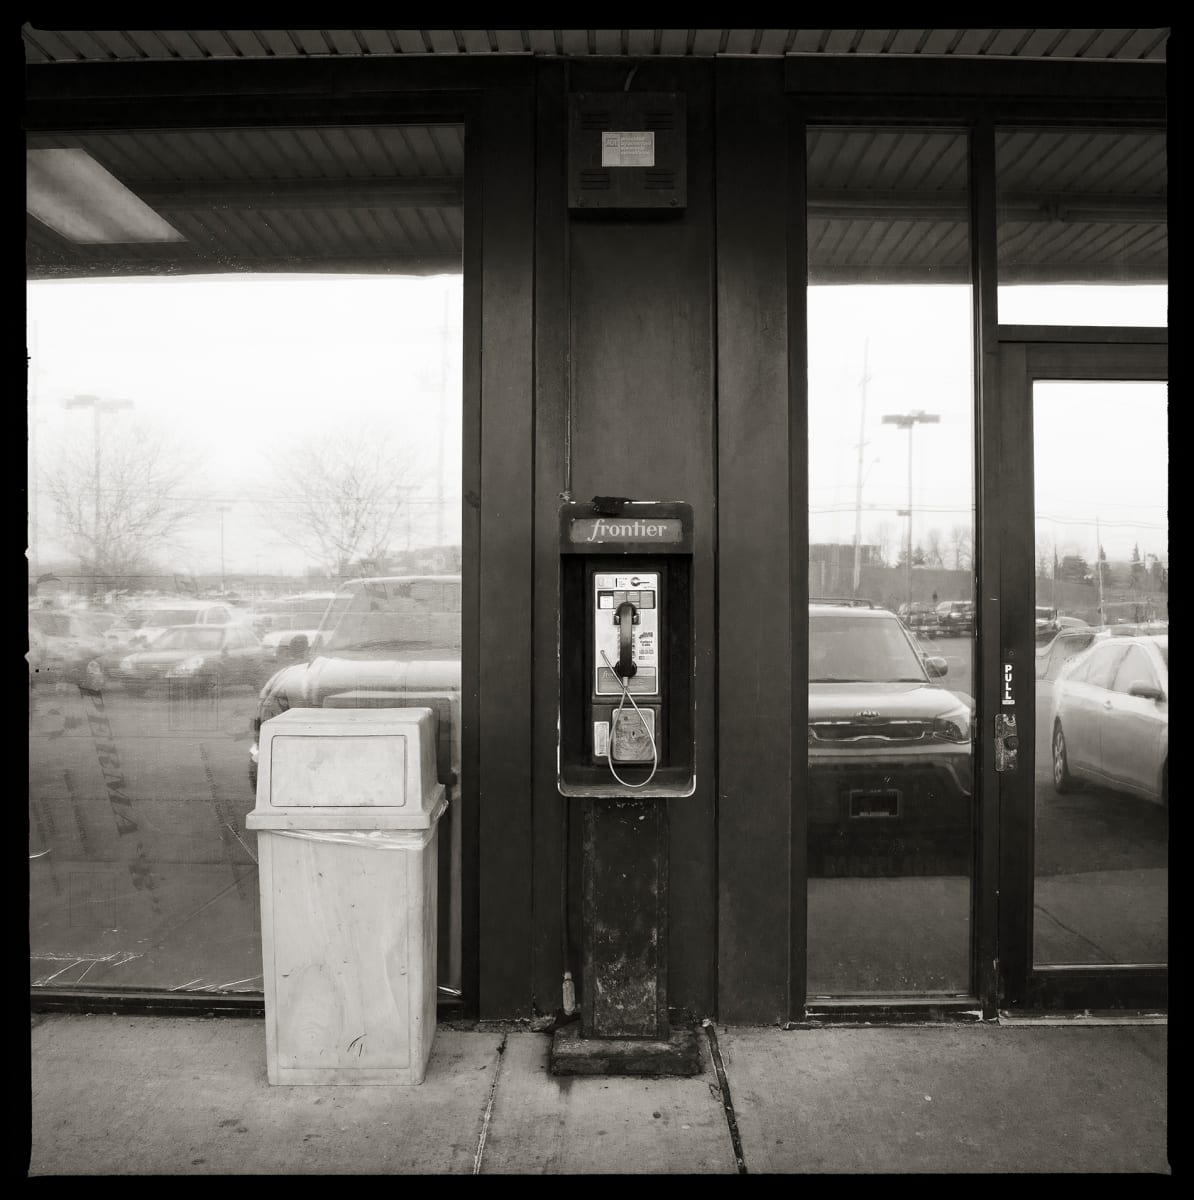 585.671.9899 – Bay Center Plaza, 1217 Bay Road, Webster, NY 14580 by Eric T. Kunsman  Image: ID: A black and white image shows a payphone against a blank portion of wall that is surrounded by semi-reflective glass windows and doors.  There is a grey garbage can to the left of the payphone